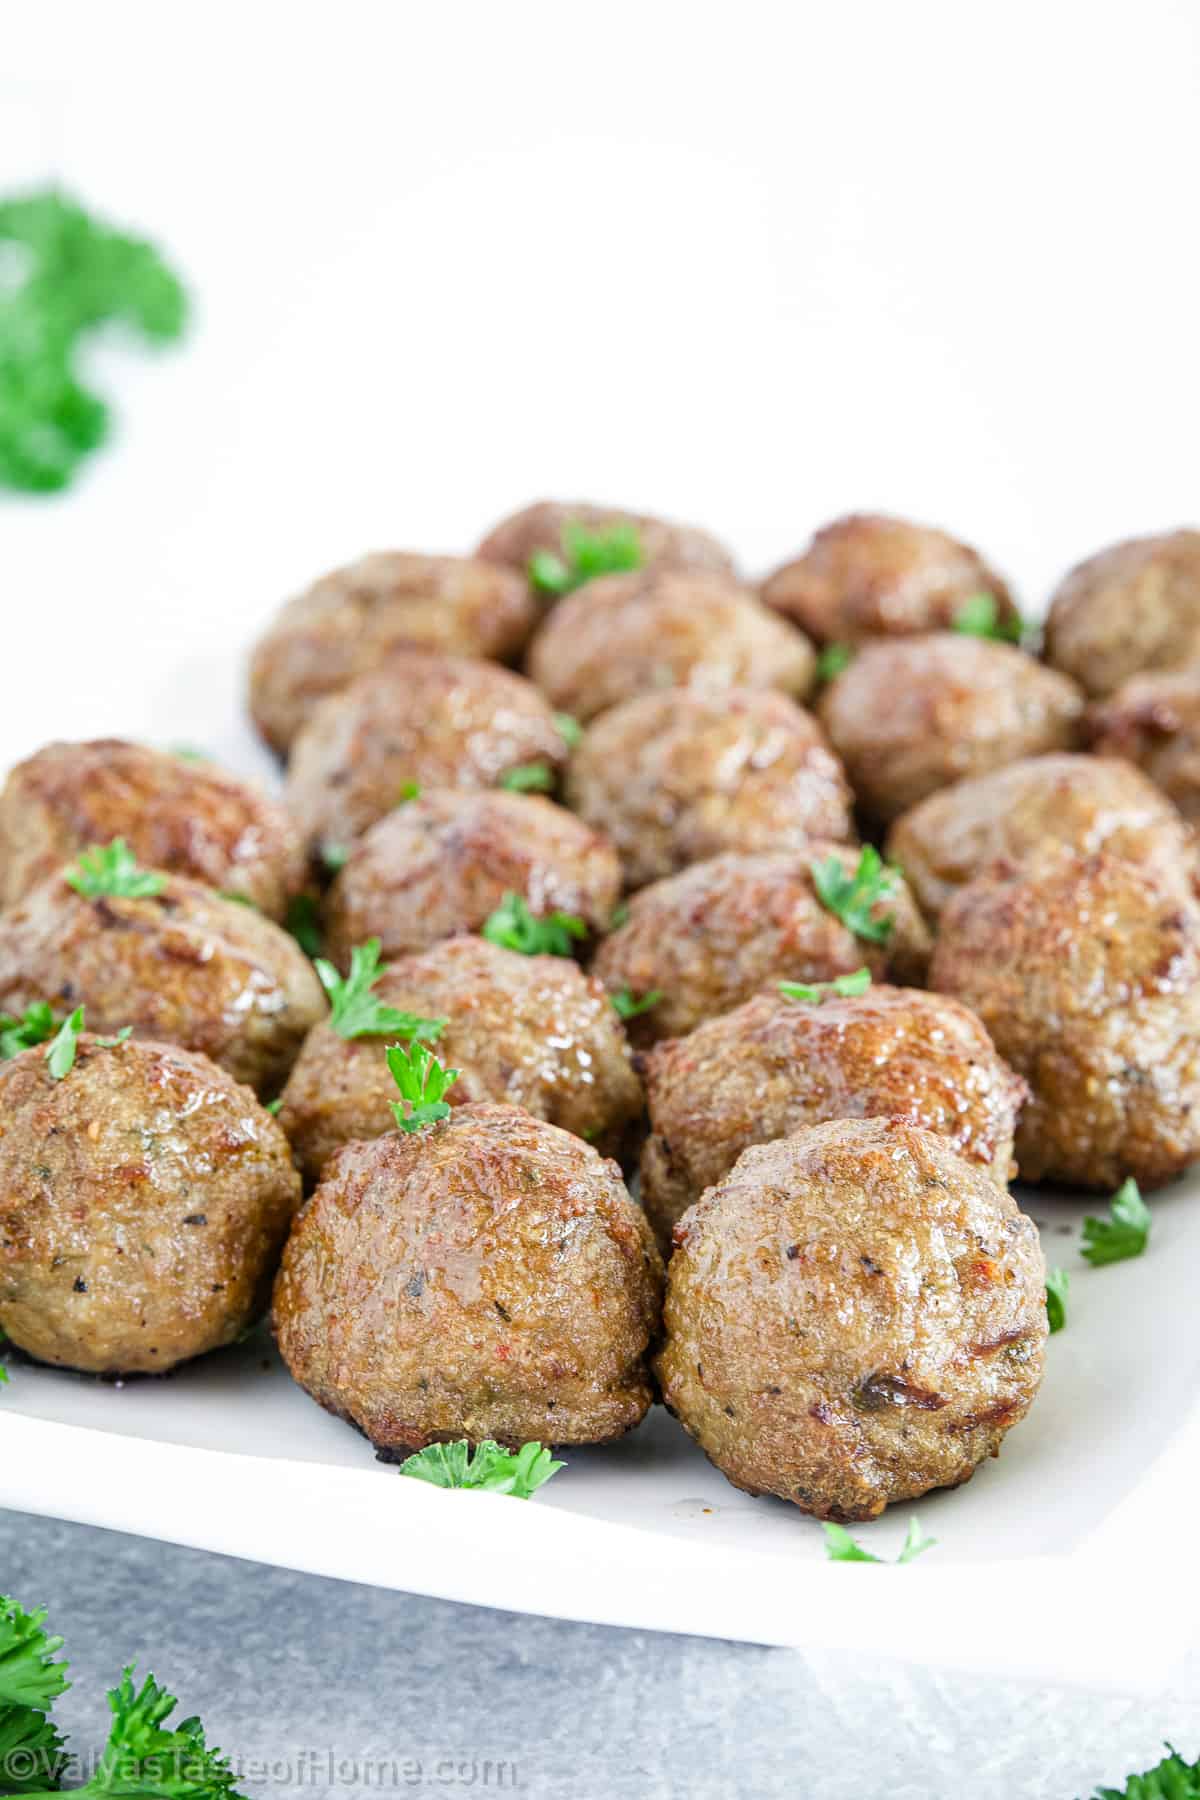 Baked meatballs are a classic comfort food that brings warmth and satisfaction to any meal. 